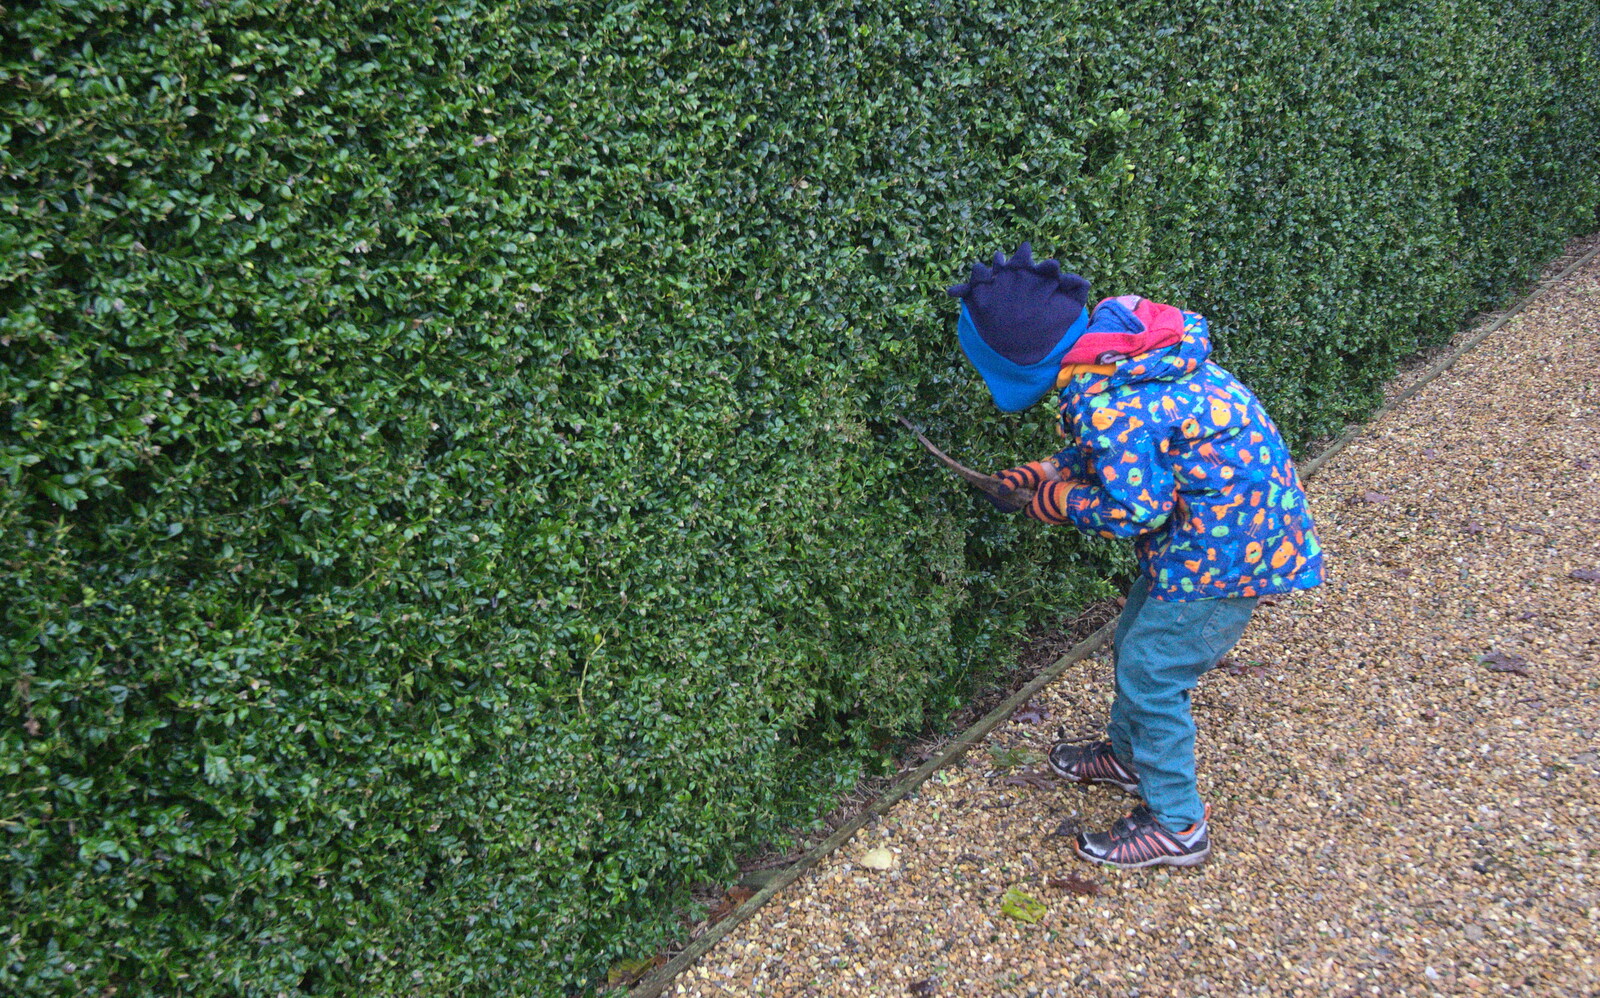 Harry pokes around in a hedge from A Trip to Ickworth House, Horringer, Suffolk - 30th December 2016